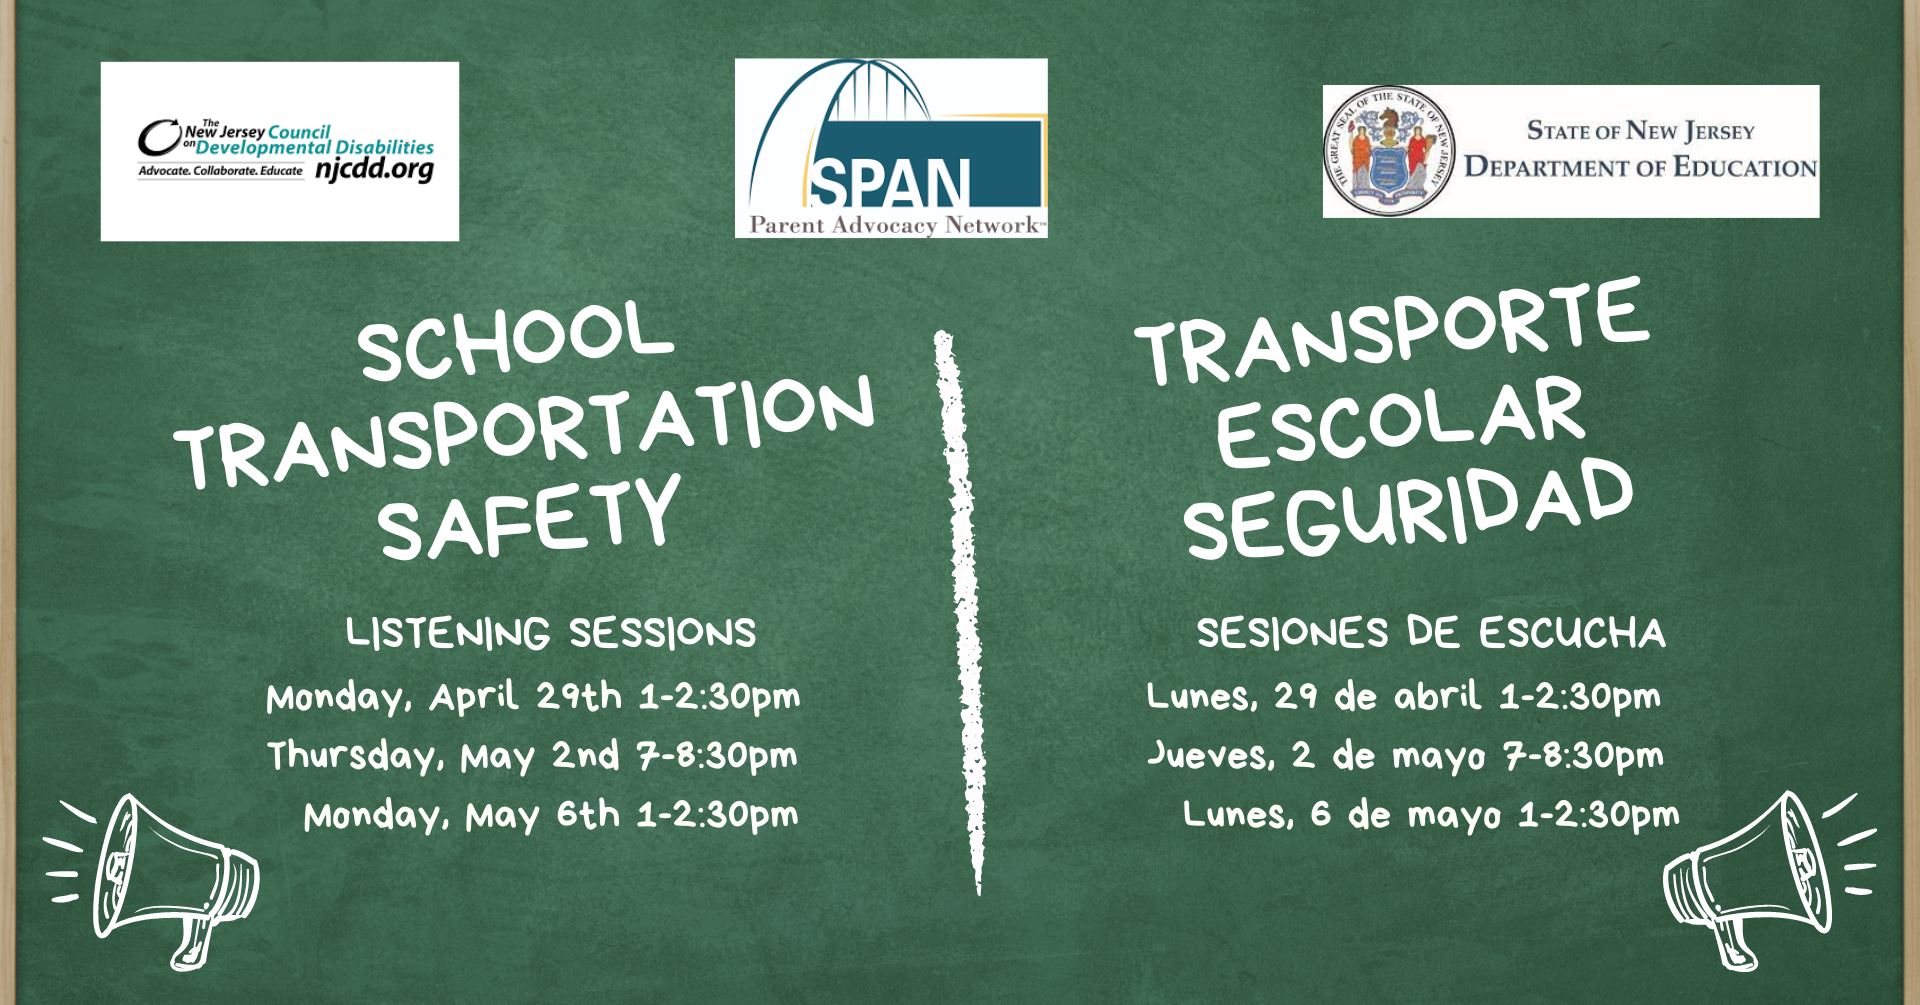 School Transportation Safety Listening Session Announcement